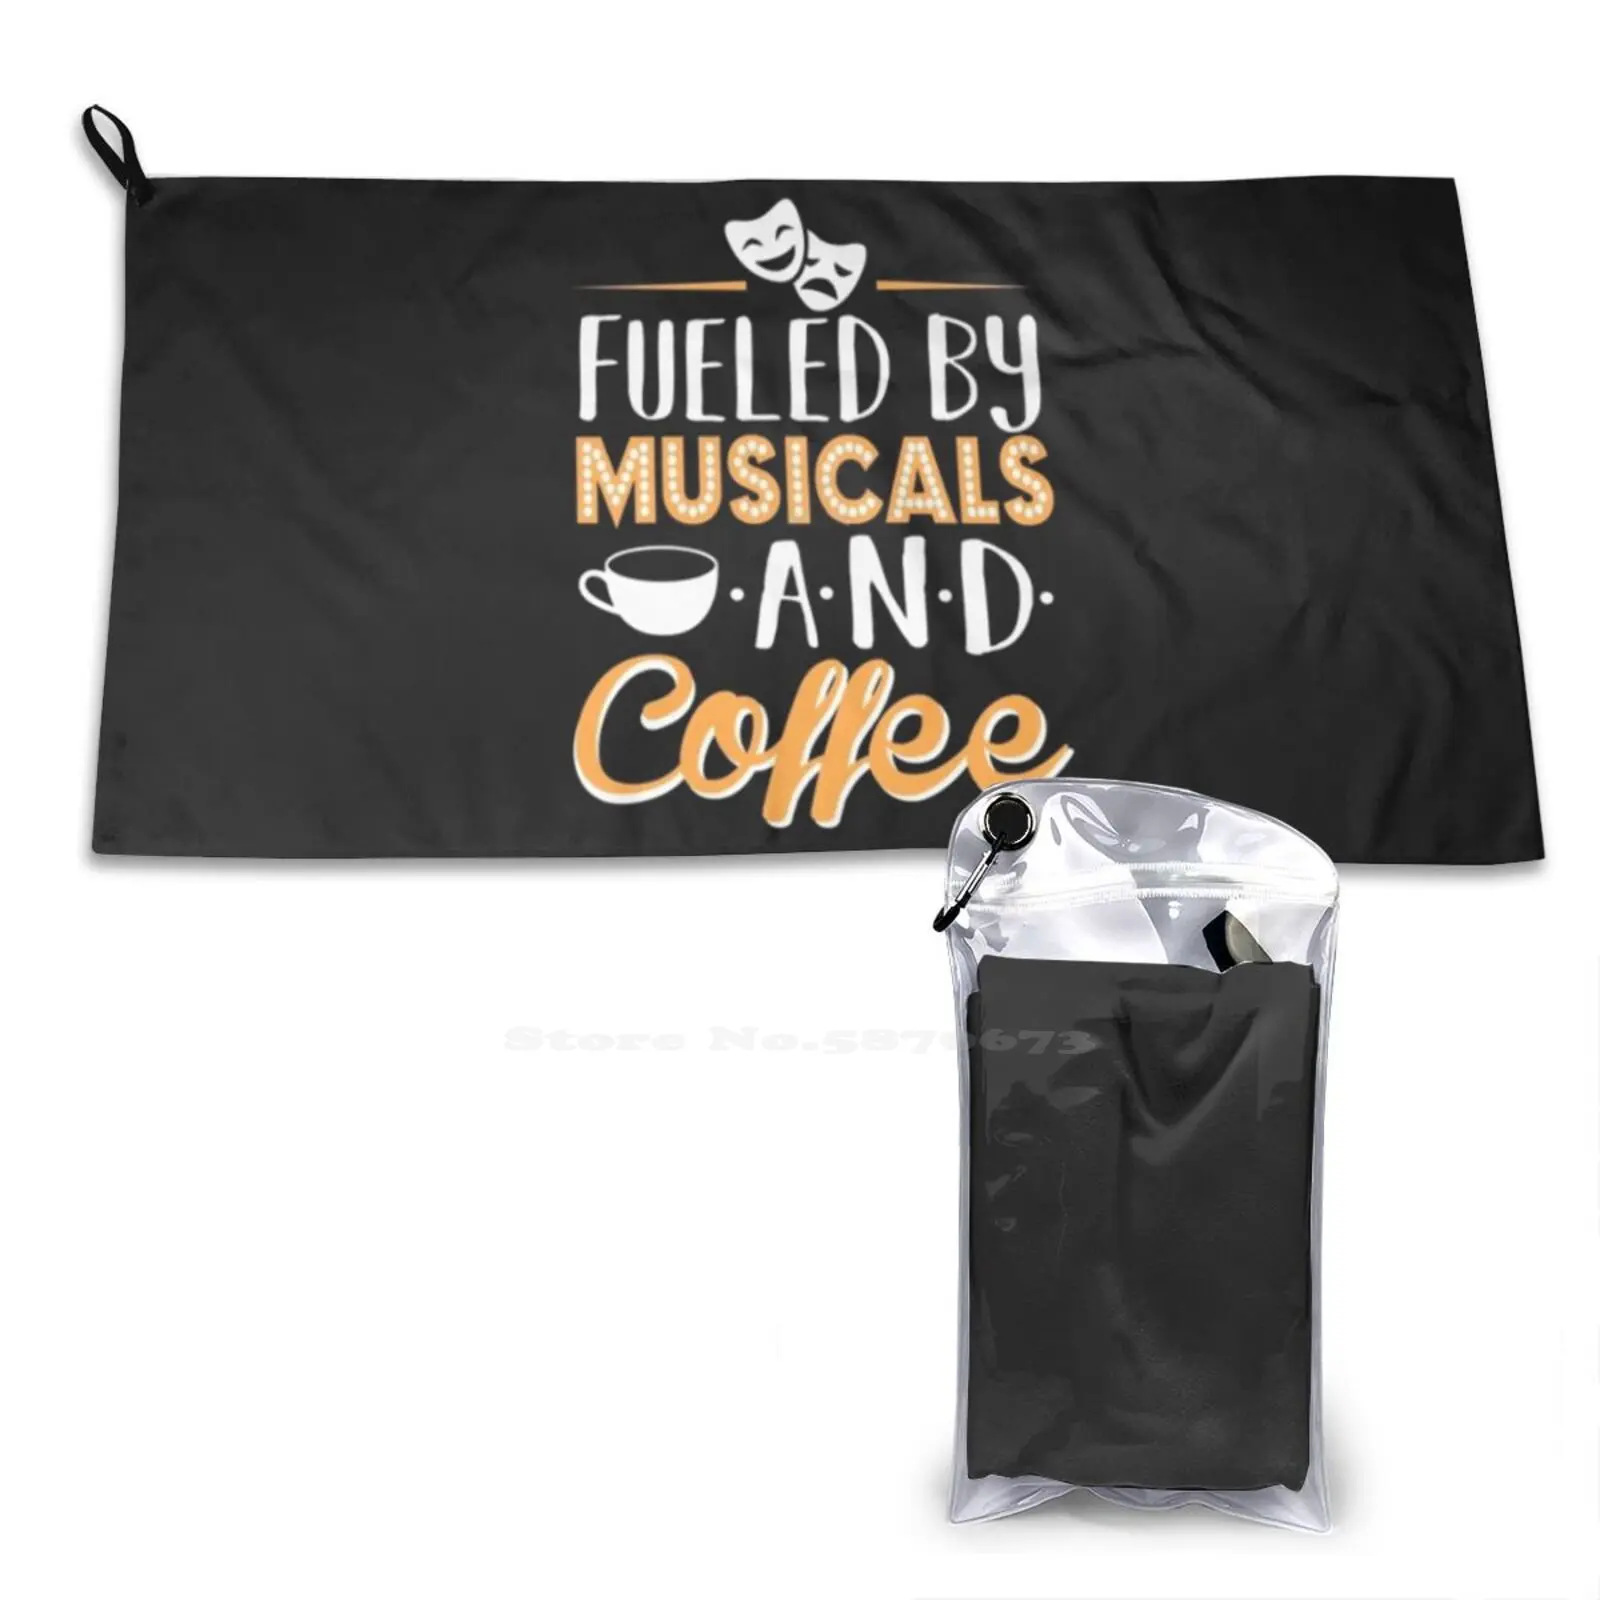 

Fueled By Musicals And Coffee 3D Print Bath Towel Strong Water Absorption Broadway Musical Musical Theatre Broadway Fan Theatre